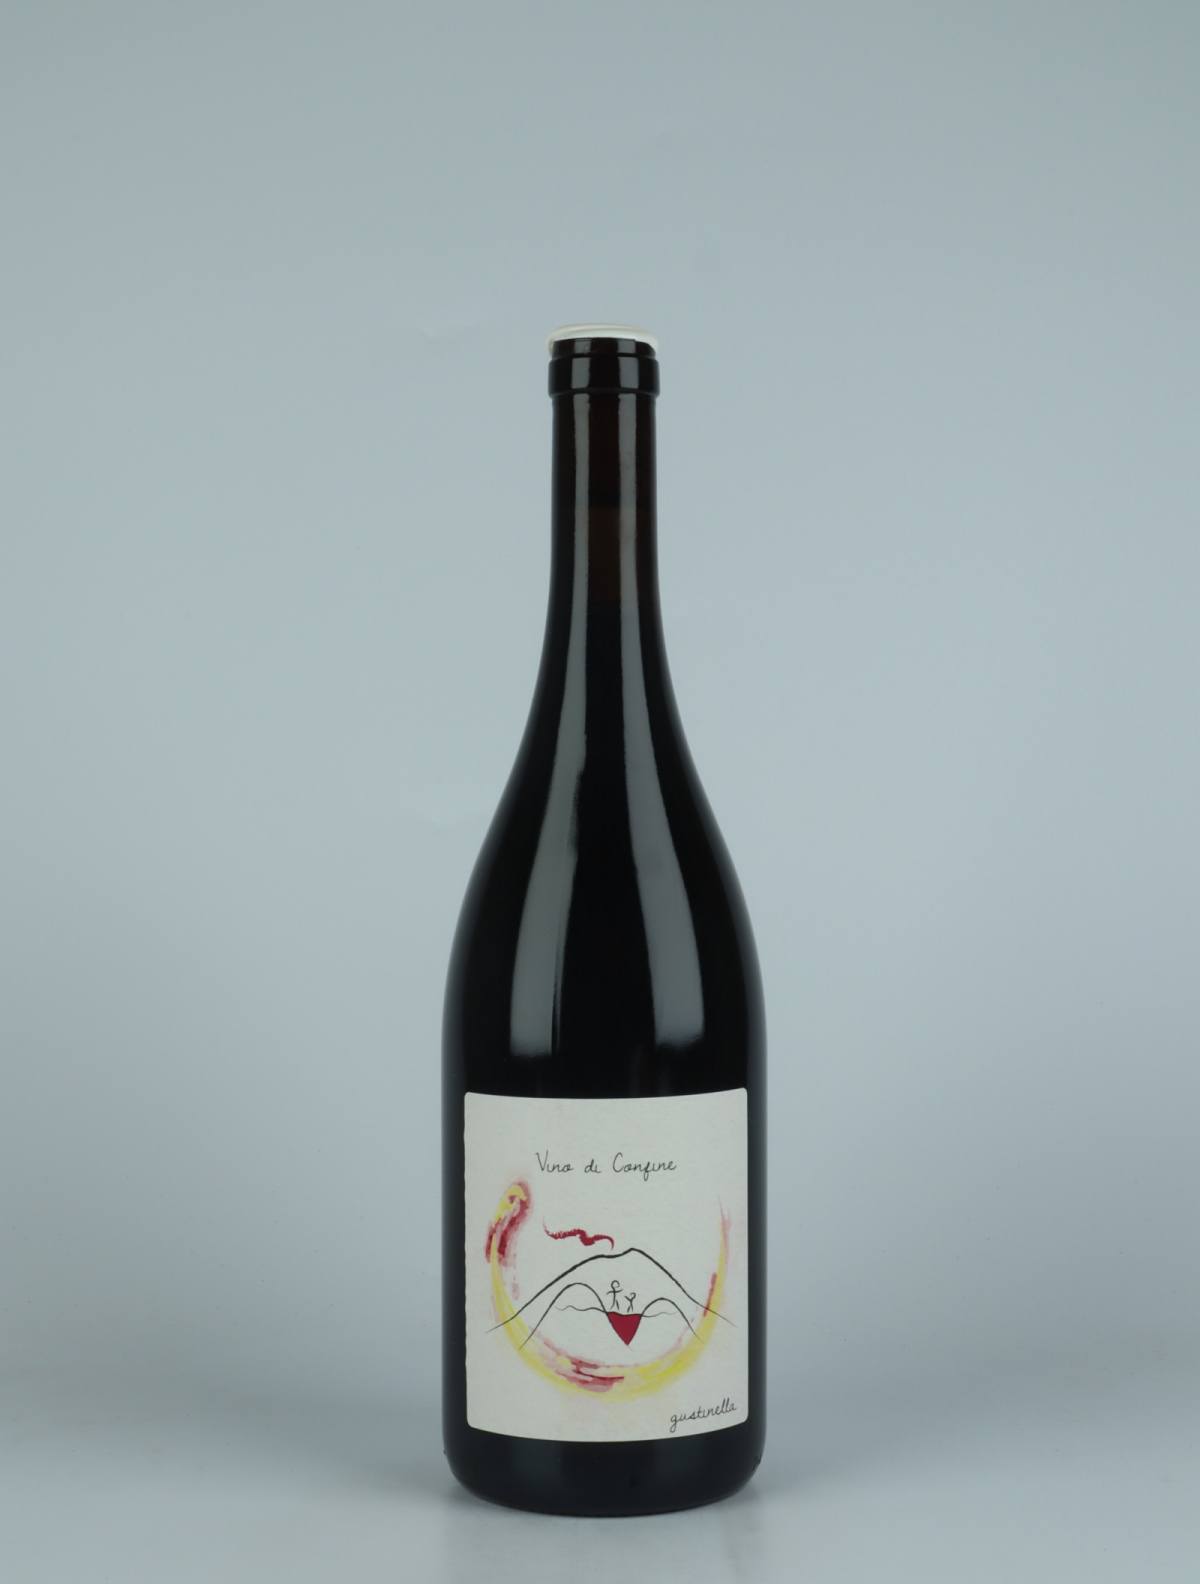 A bottle 2021 Vino di Confine Red wine from Gustinella, Sicily in Italy